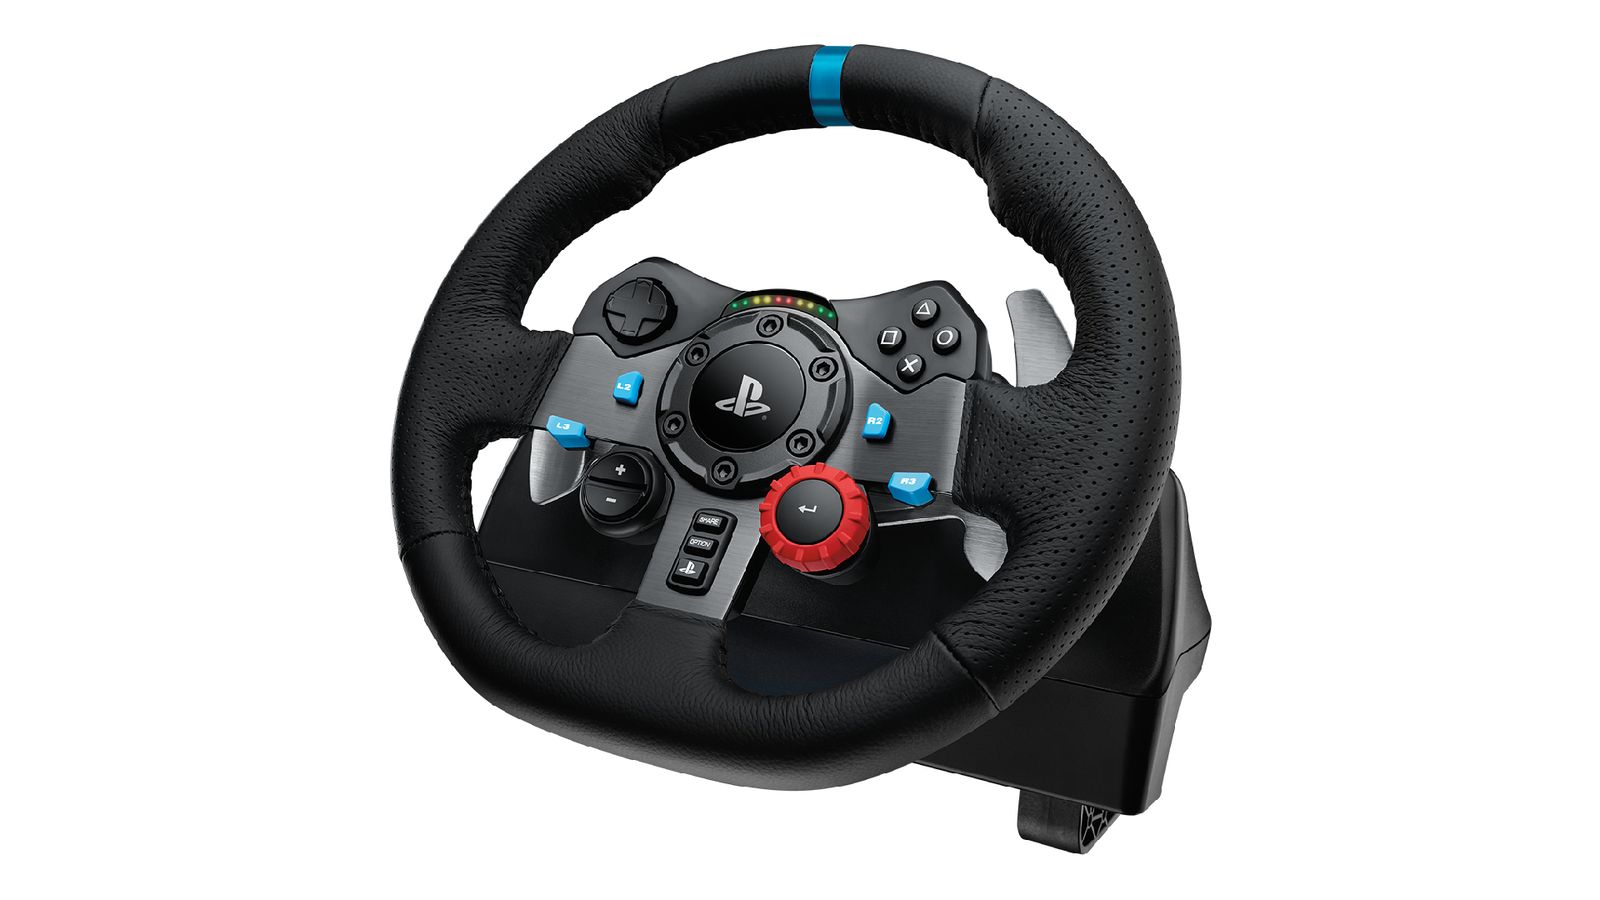 Logitech G G29 product image of a black and grey wheel with red and blue accents.